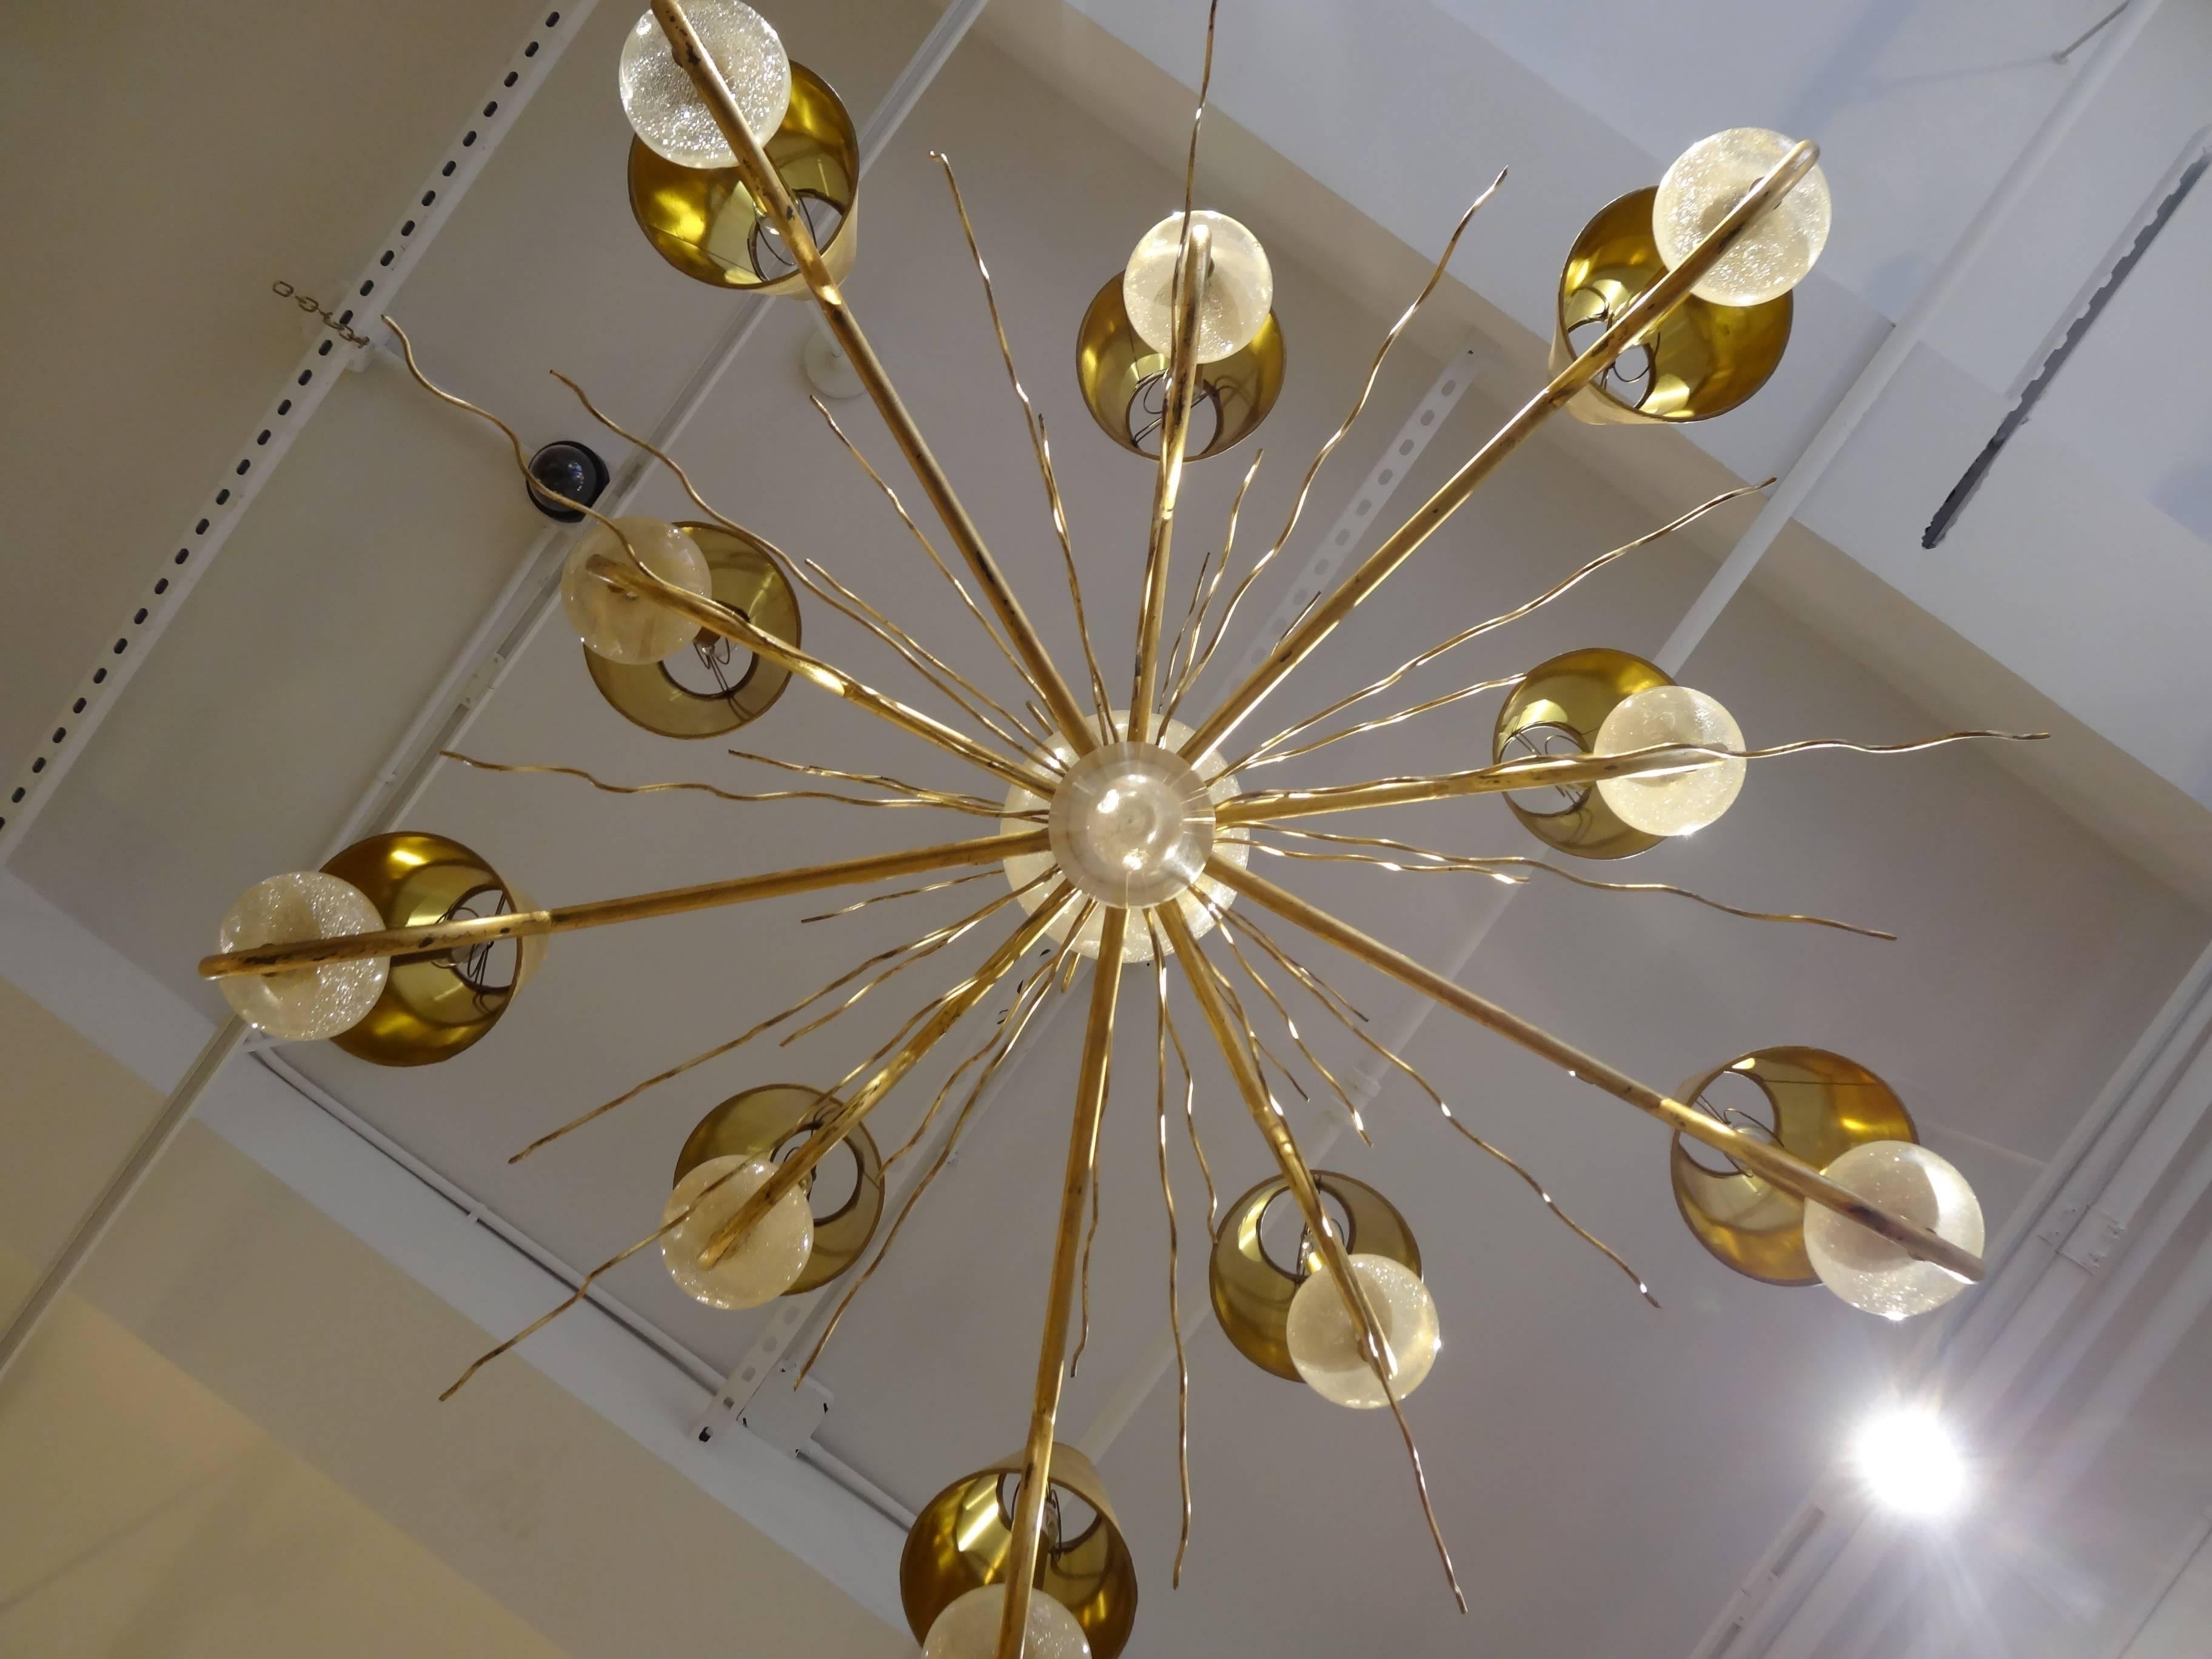 A most unusual lucite and gilt metal chandelier by Van eal.
Beautifully designed with clear lucite only which is highlighted by the gilded metal.
A modern whimsical take on a neoclassical design.
Grand in scale